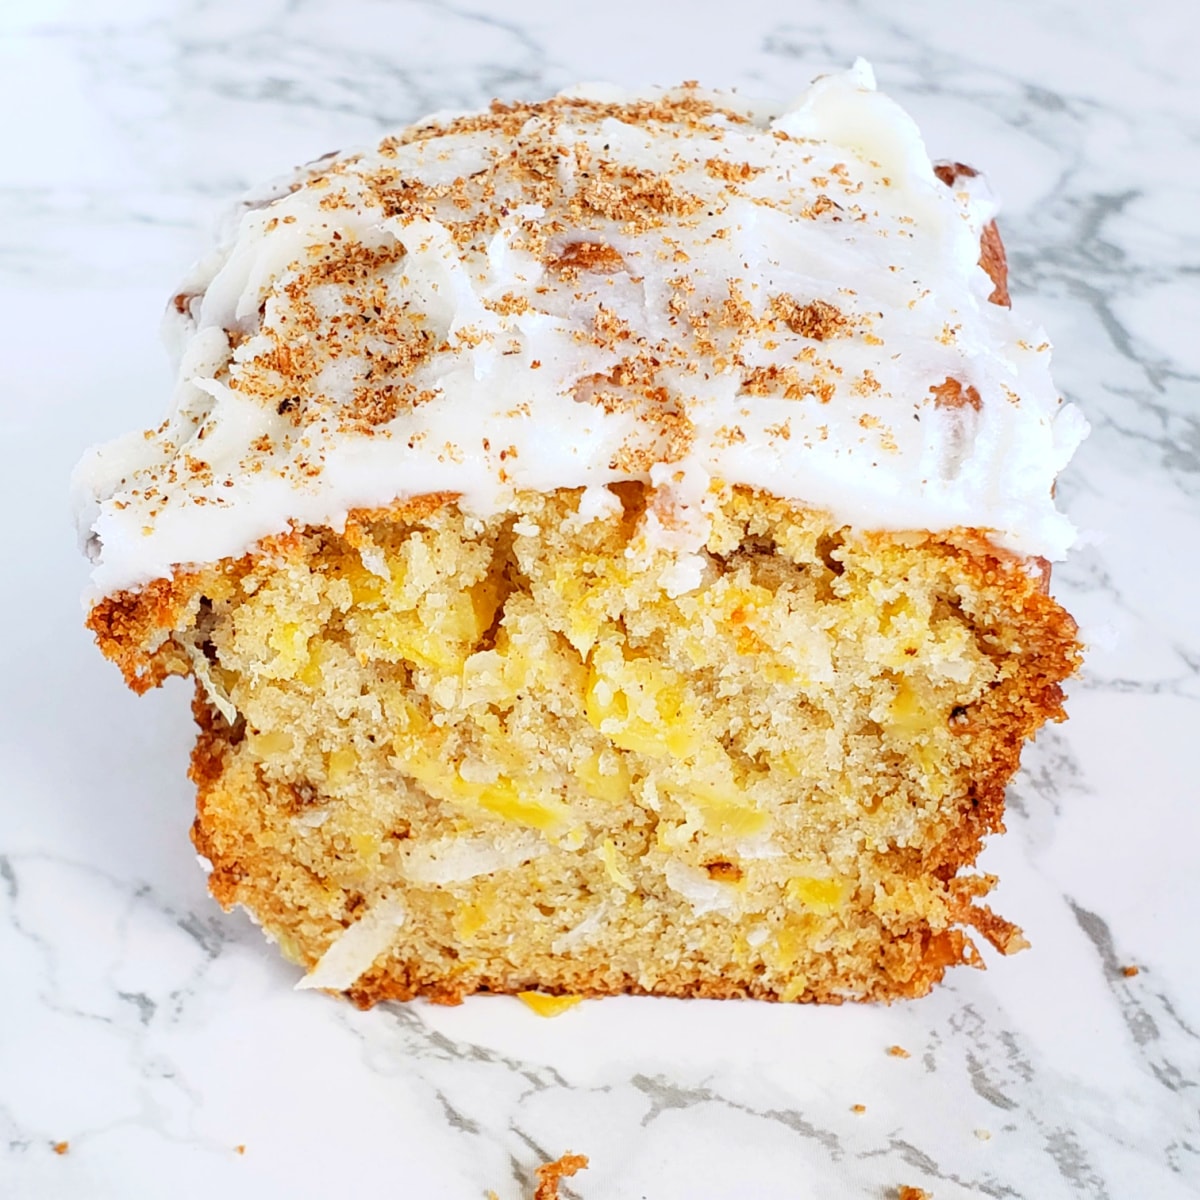 Pineapple Coconut Quick Bread is the easy, tropical treat that you want for breakfast, tea time or even dessert. Slightly sweet and satisfying, with crunchy walnuts and fragrant coconut inside, it checks all the boxes. Make it in tiny loaves and you'll have some to give away AND some for you! 